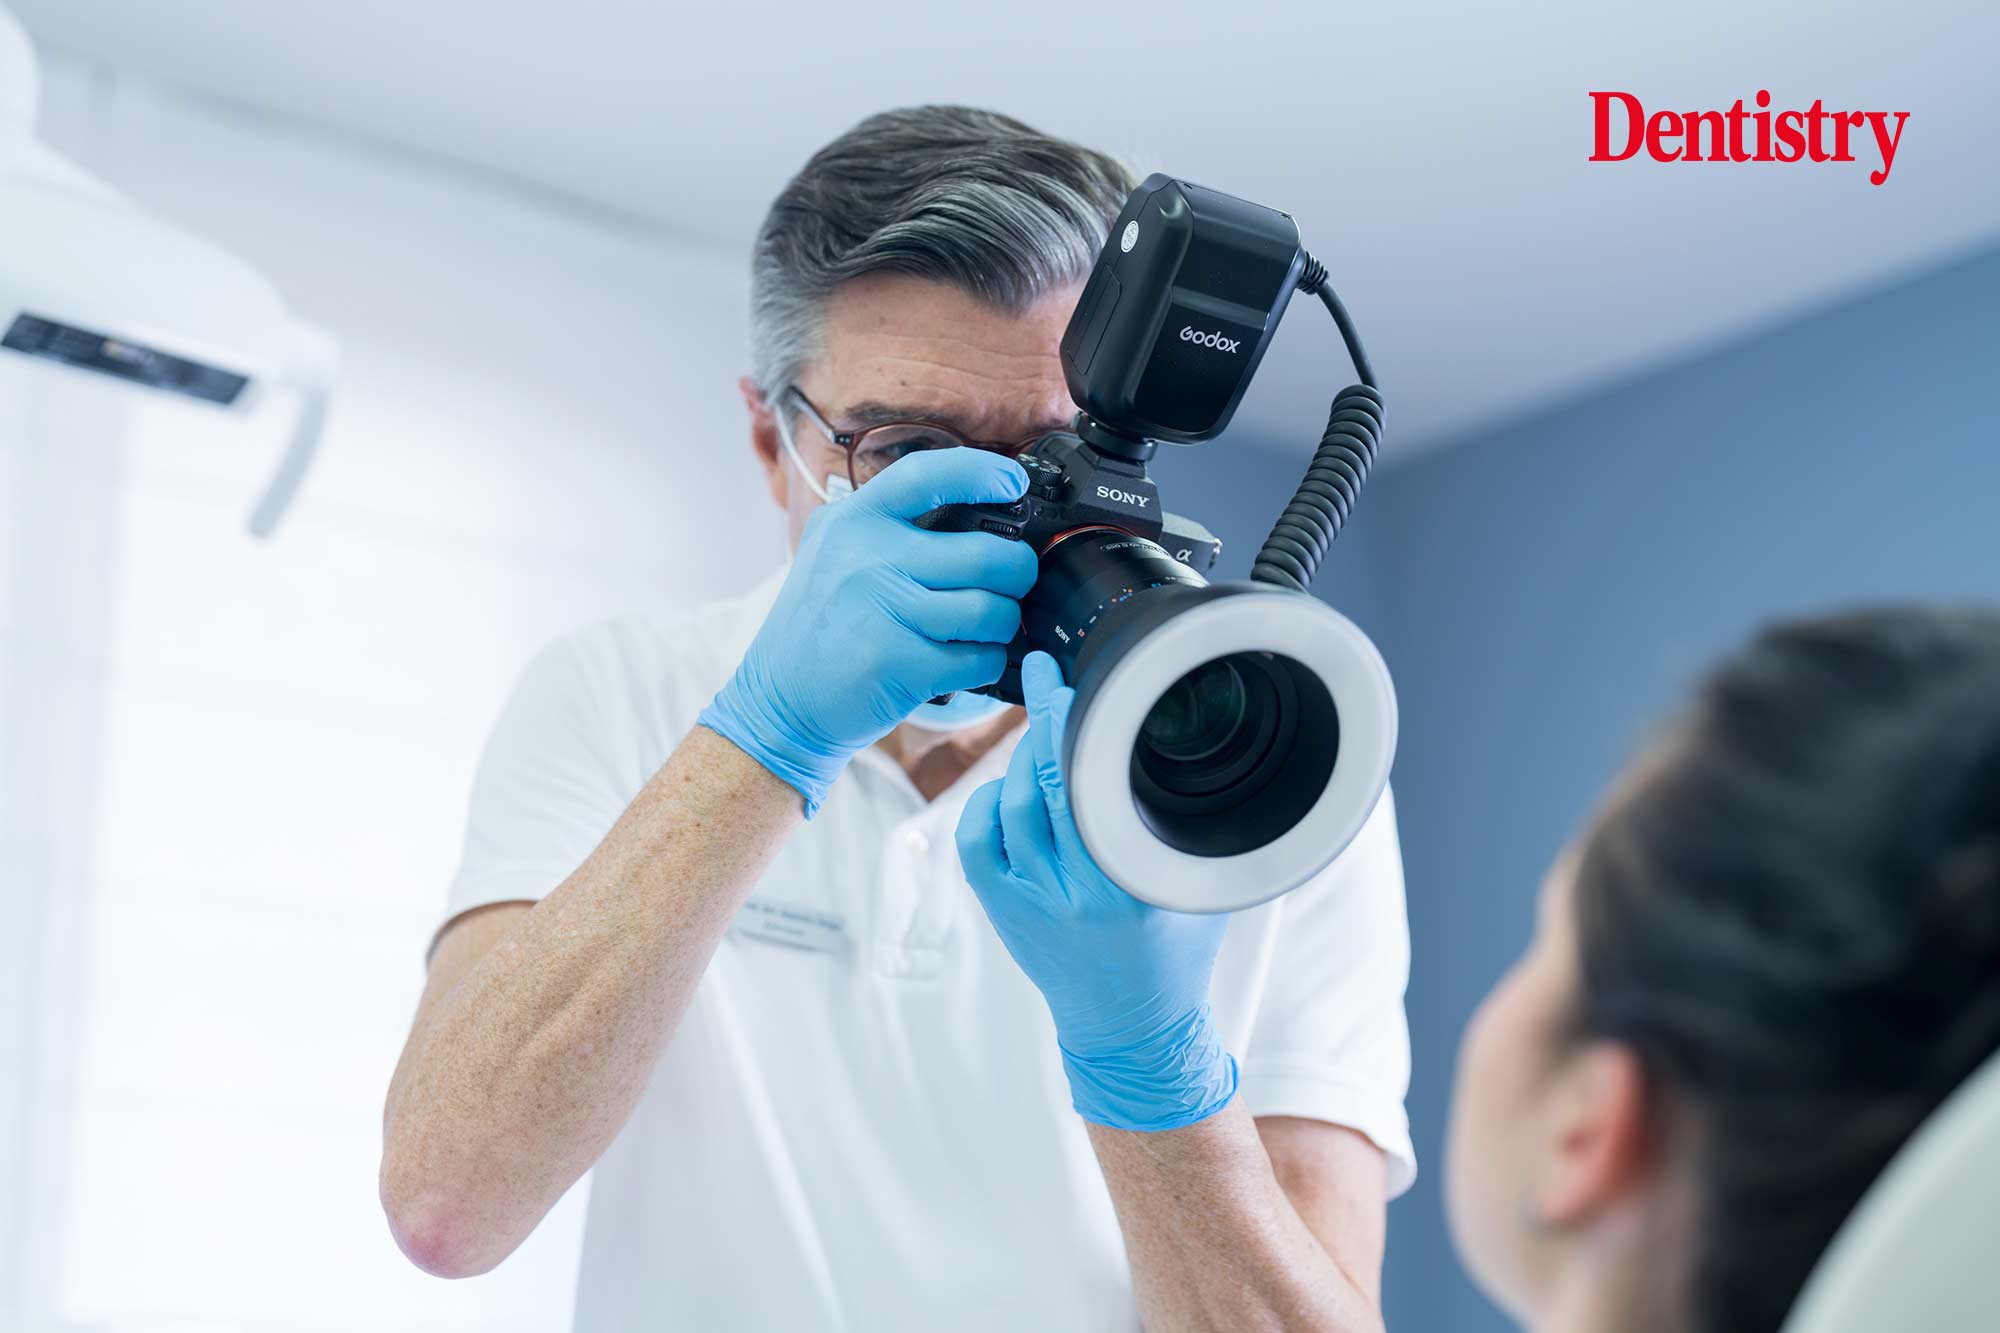 Why dental photography is beneficial for practice and patients